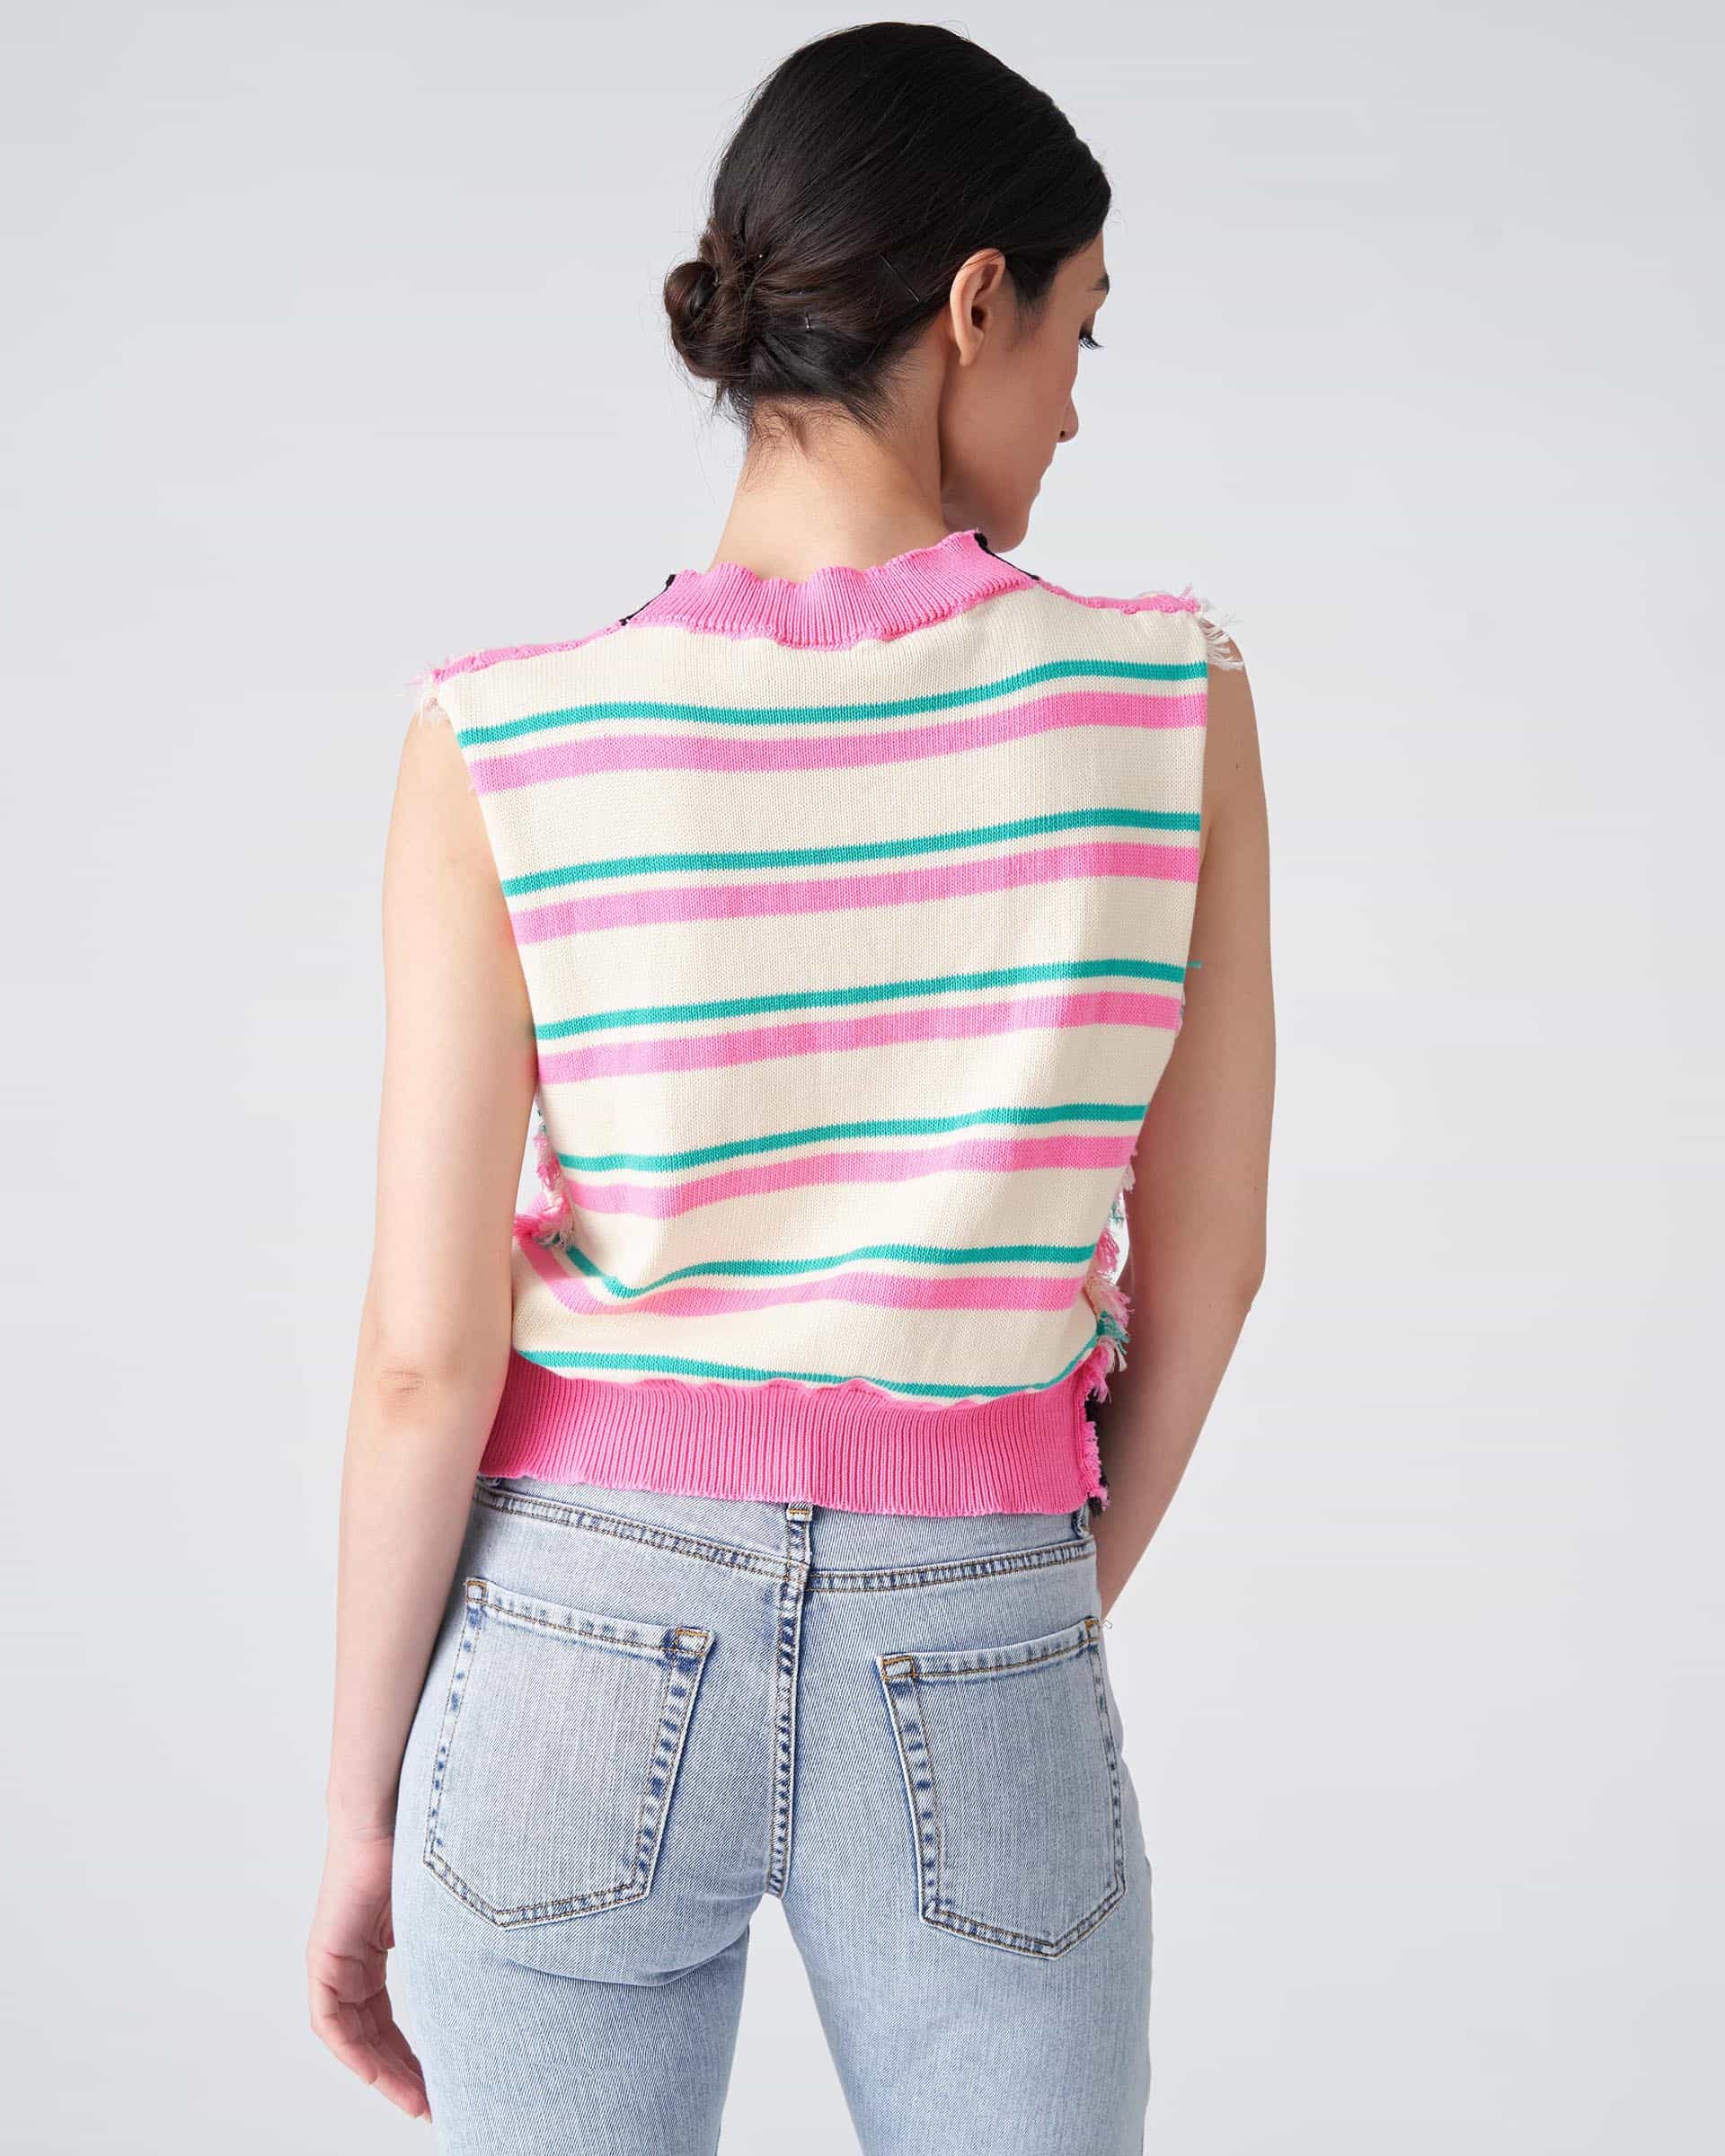 The Market Store | Vest Sweater With Different Stripes